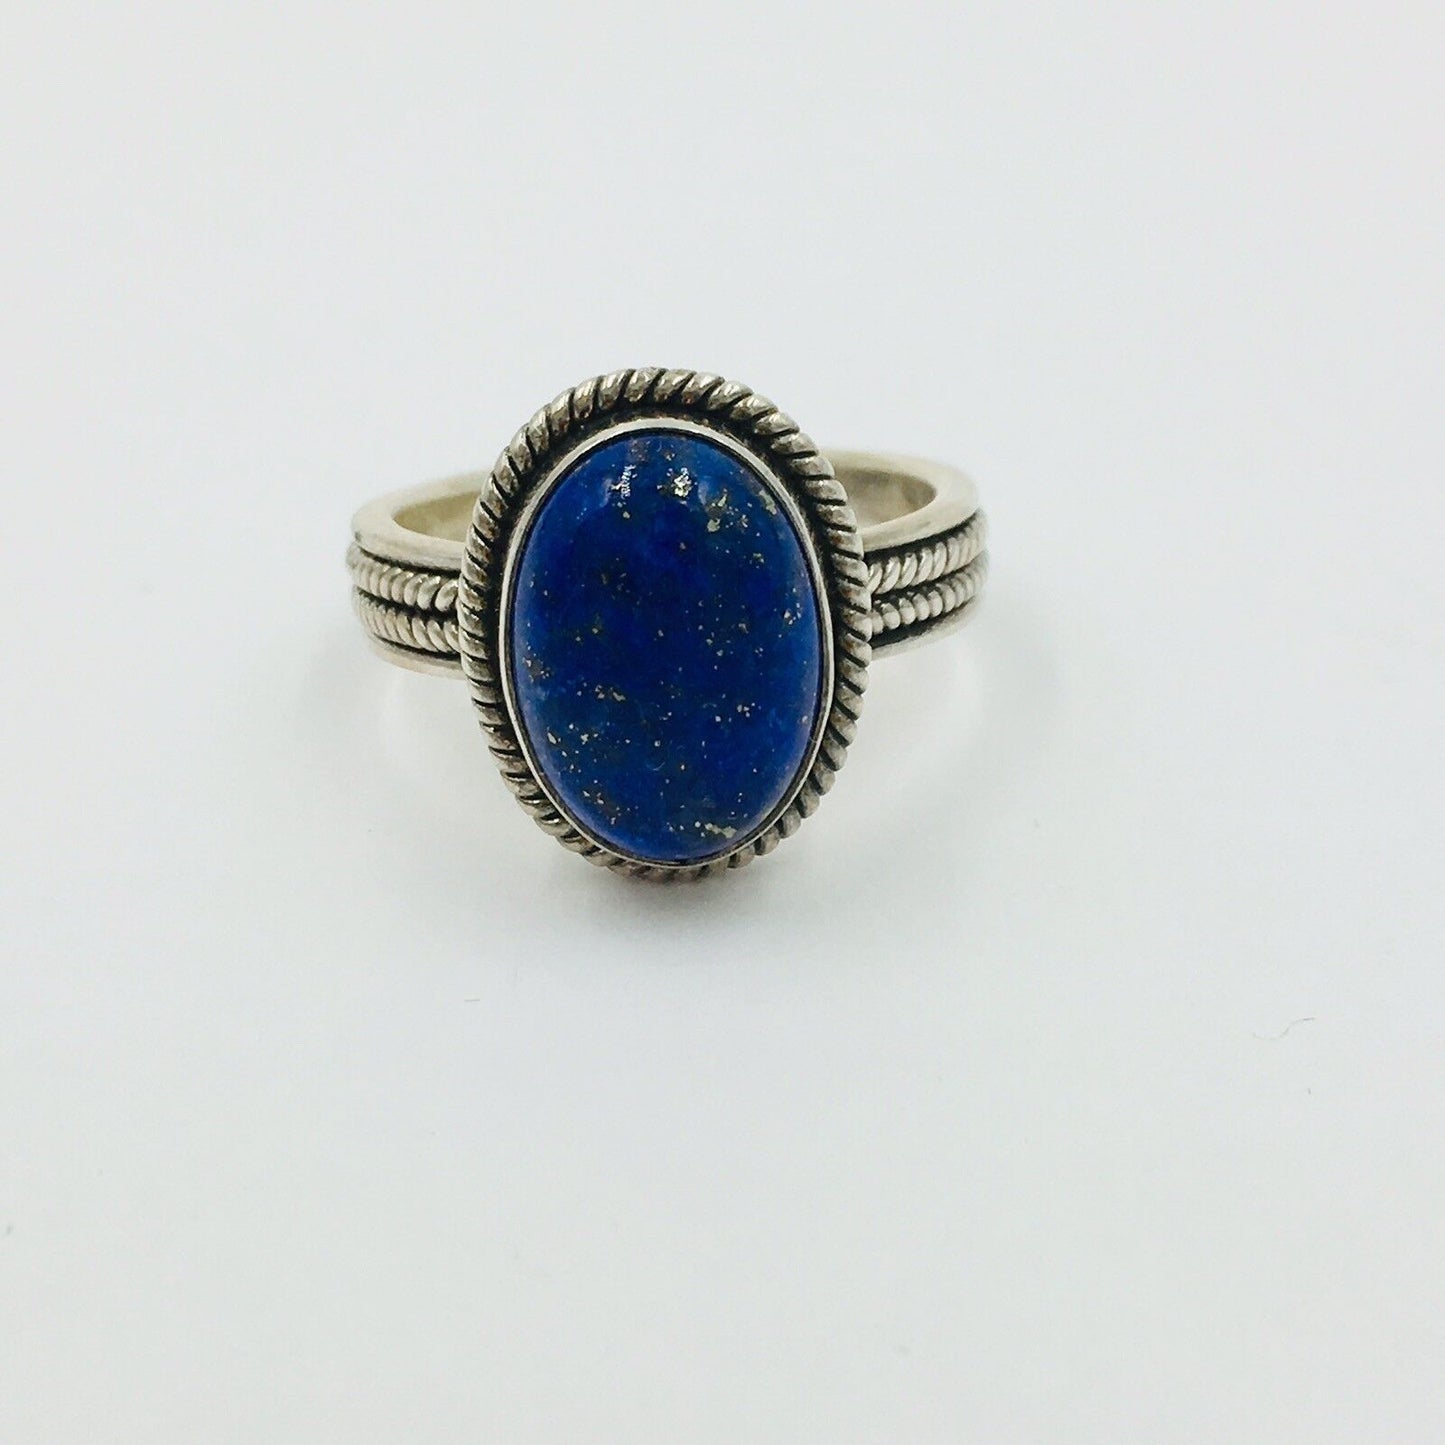 Suarti BA Indonesia Lapis Lazuli Oval Stone Sterling Silver Rope Ring Size 9